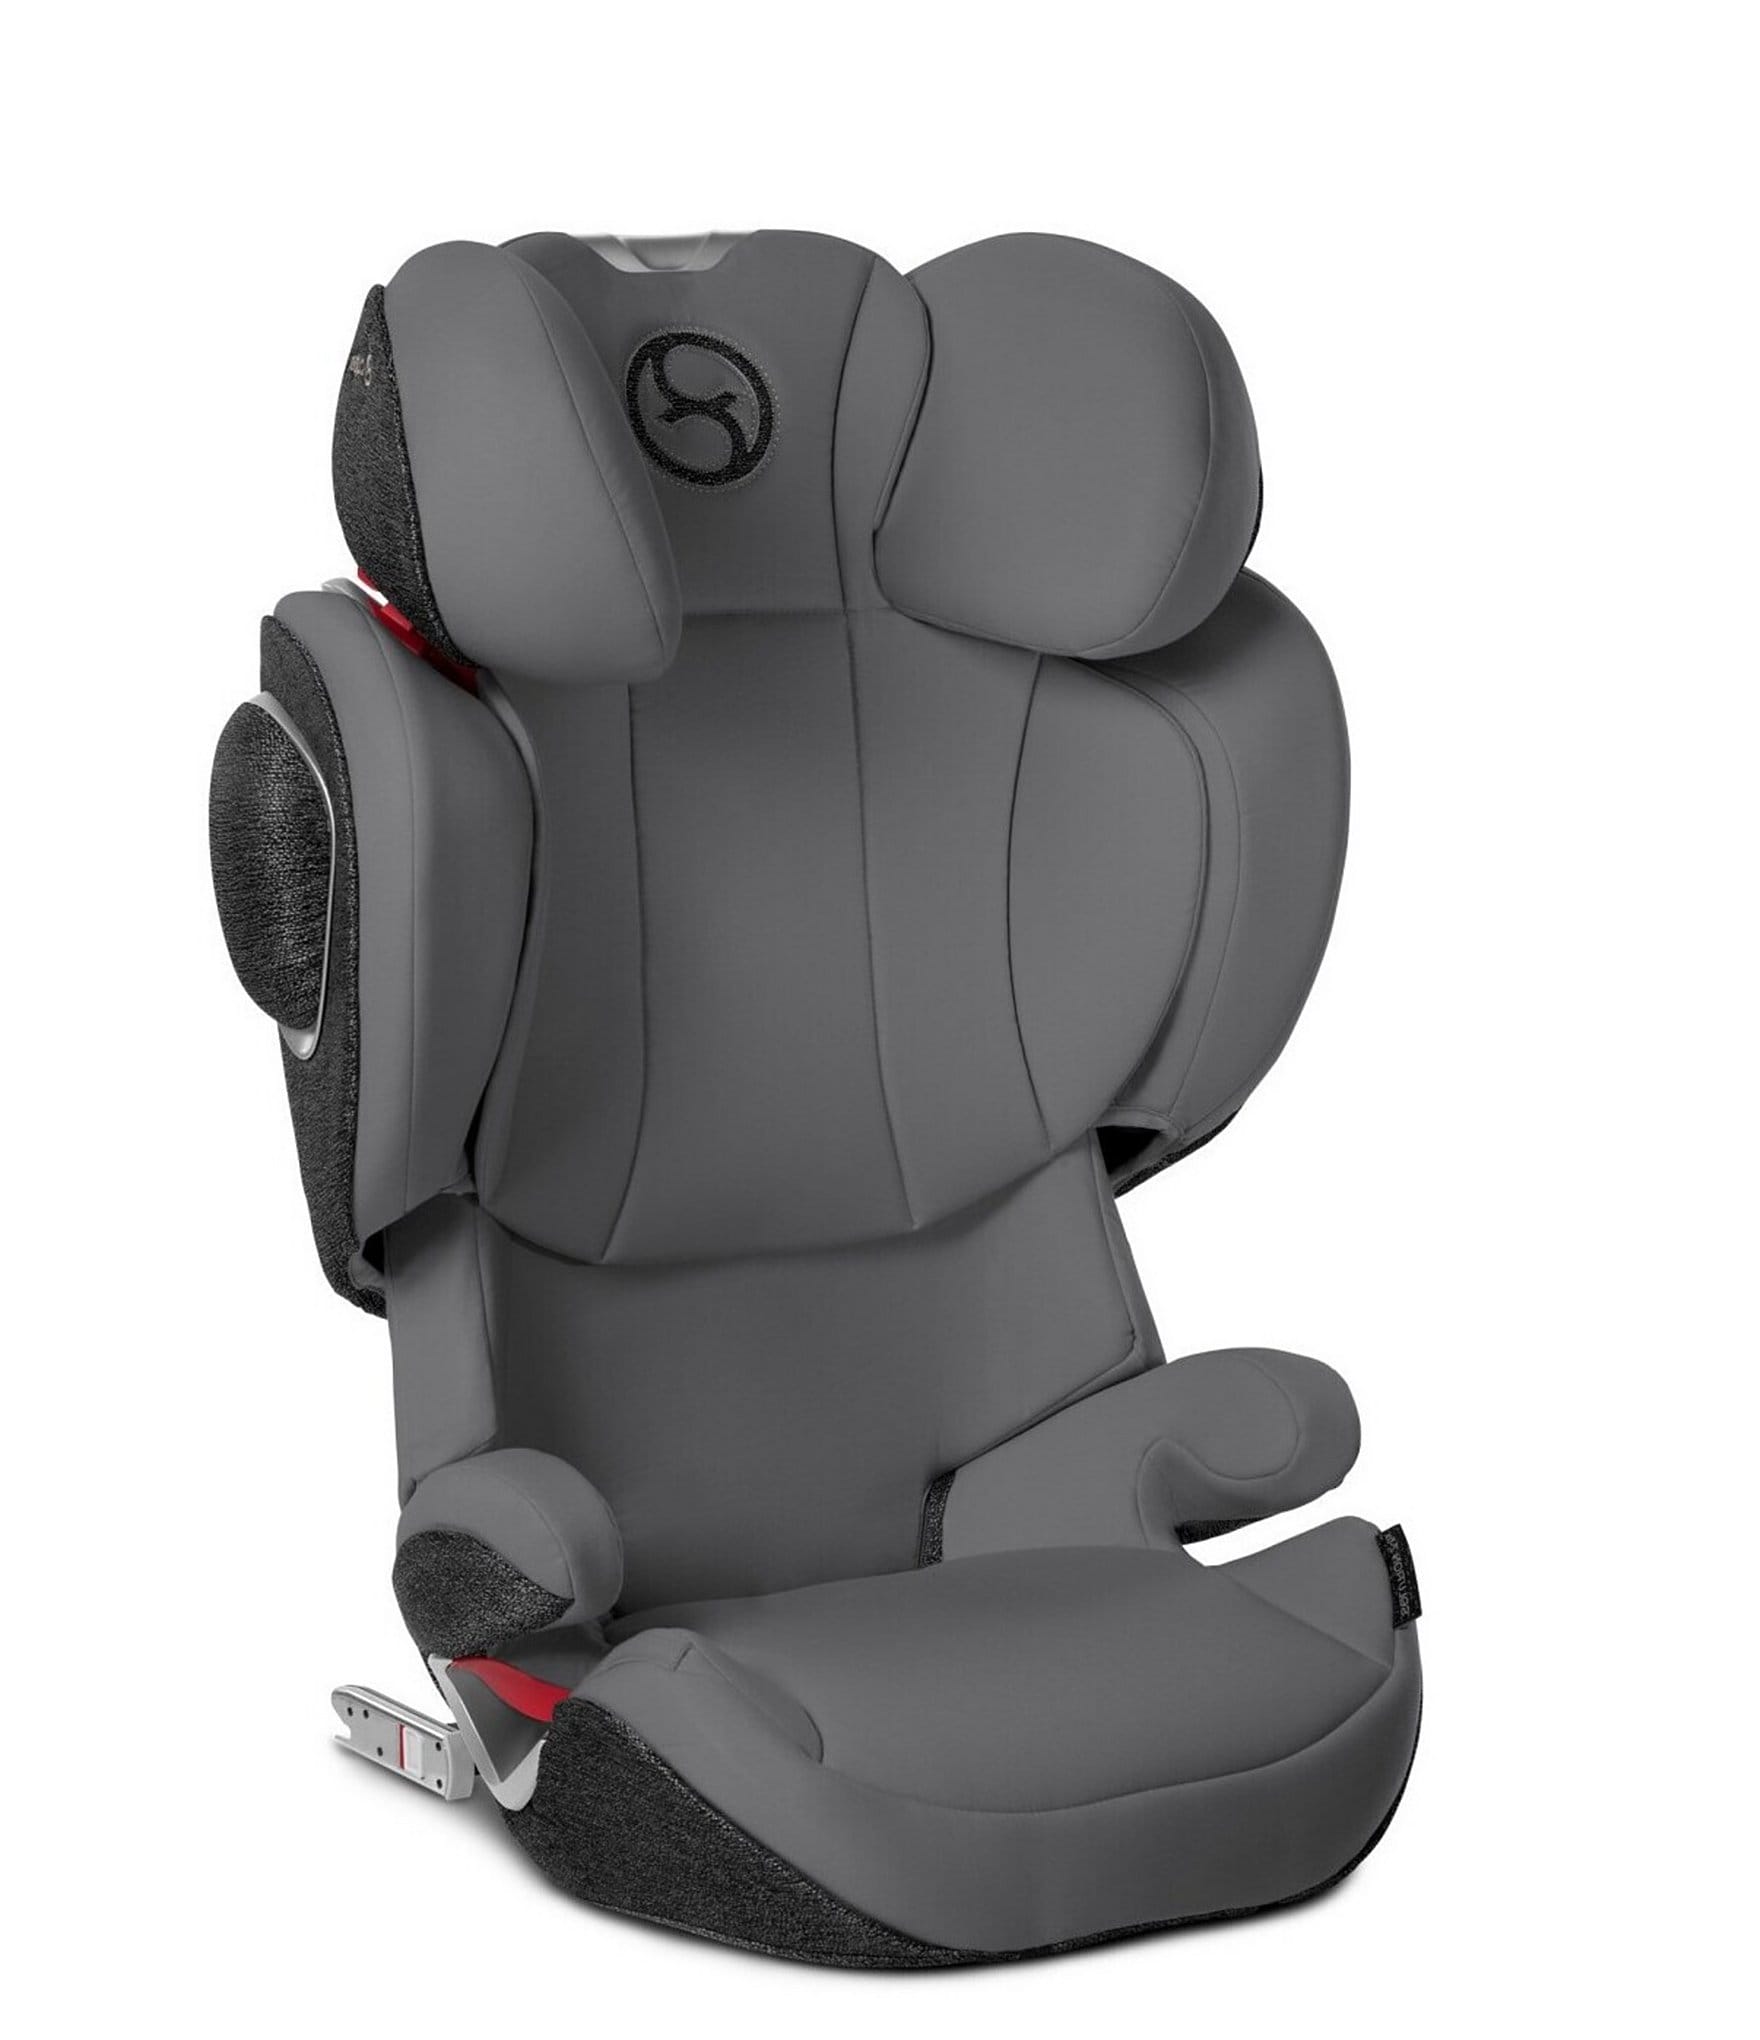 Cybex cup holder for car seats - buy online